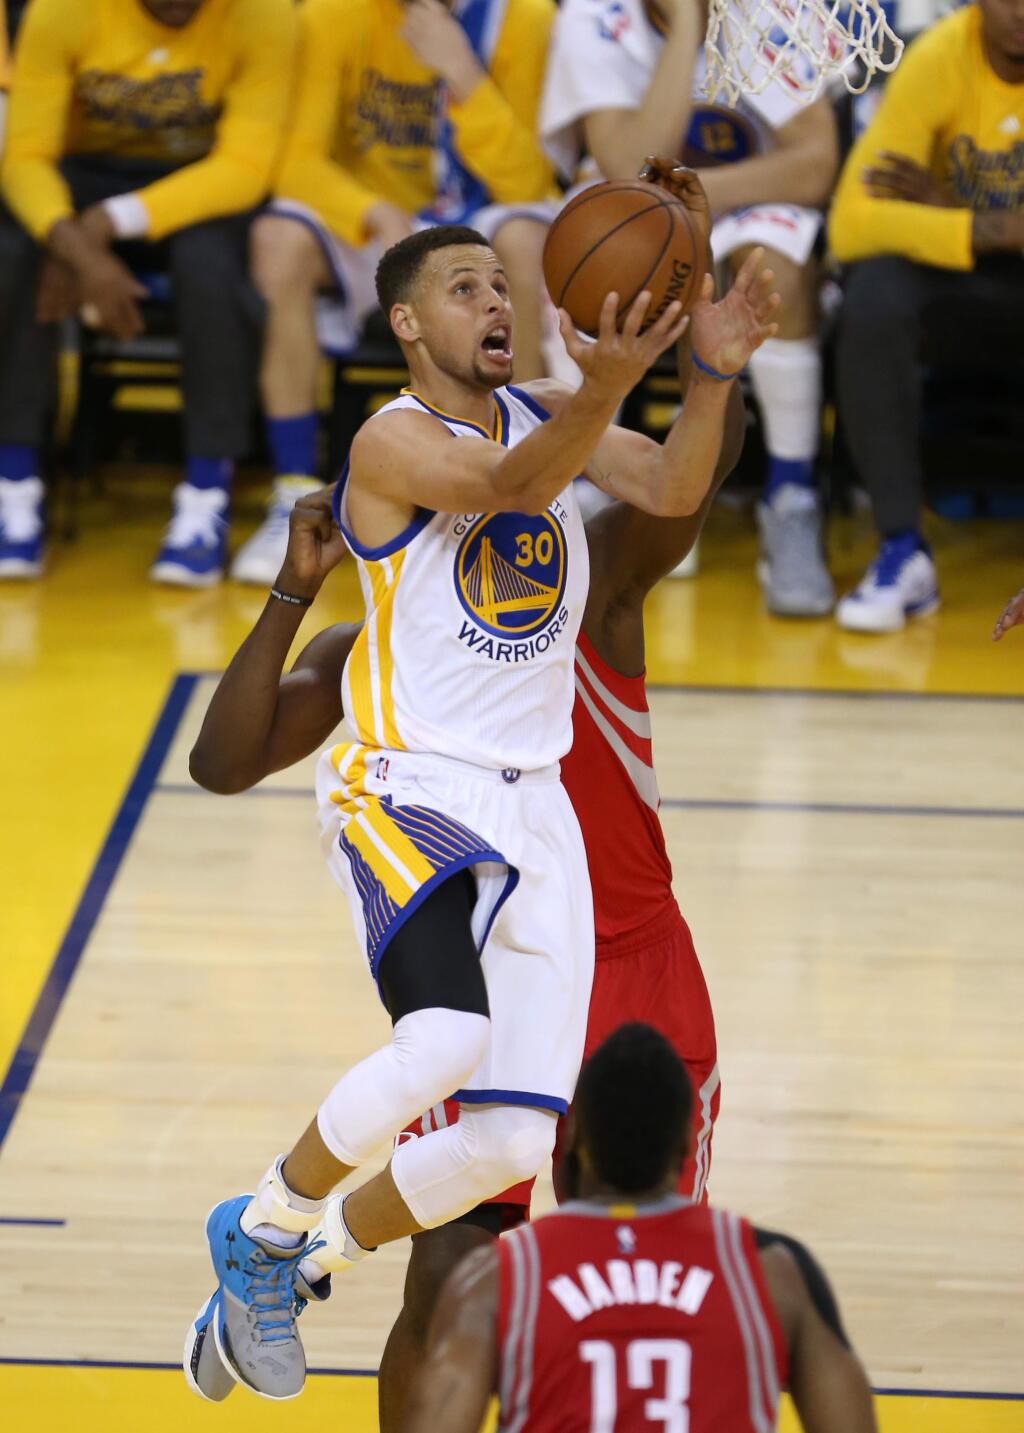 Golden State Warriors guard Stephen Curry makes a layup against the Houston Rockets, during their game in Oakland on Saturday, April 16, 2016. The Warriors defeated the Rockets 104-78.(Christopher Chung/ The Press Democrat)